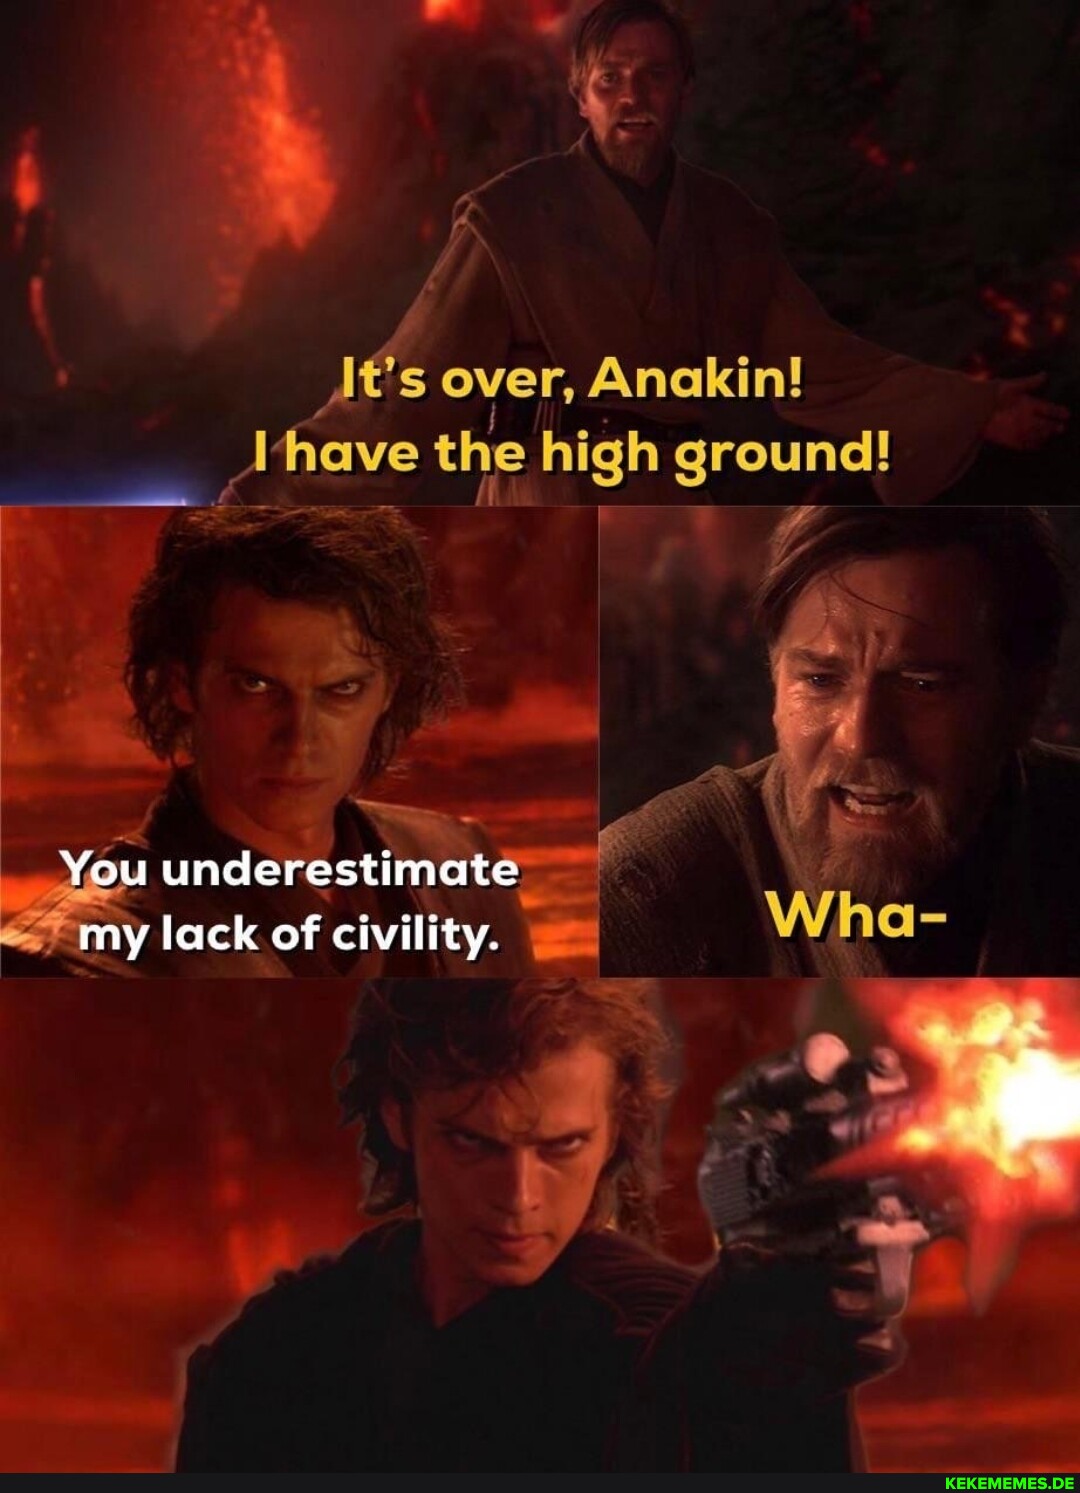 It's over, Anakin! 'have the high ground! You underestimate *my my lack of civil